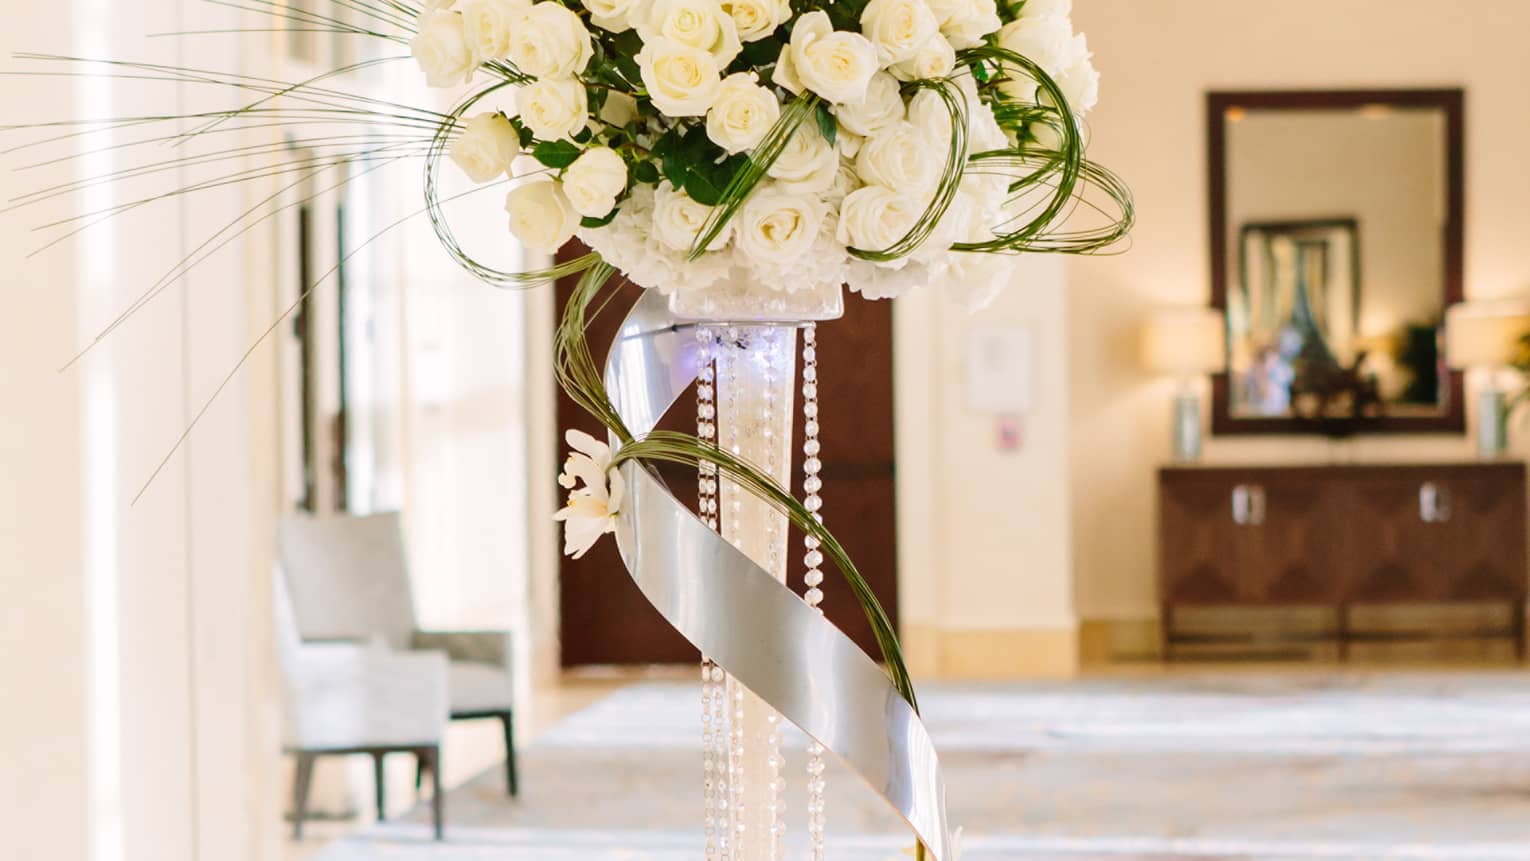 Wedding accent table with rows of name cards, tall white flower arrangement with ribbon